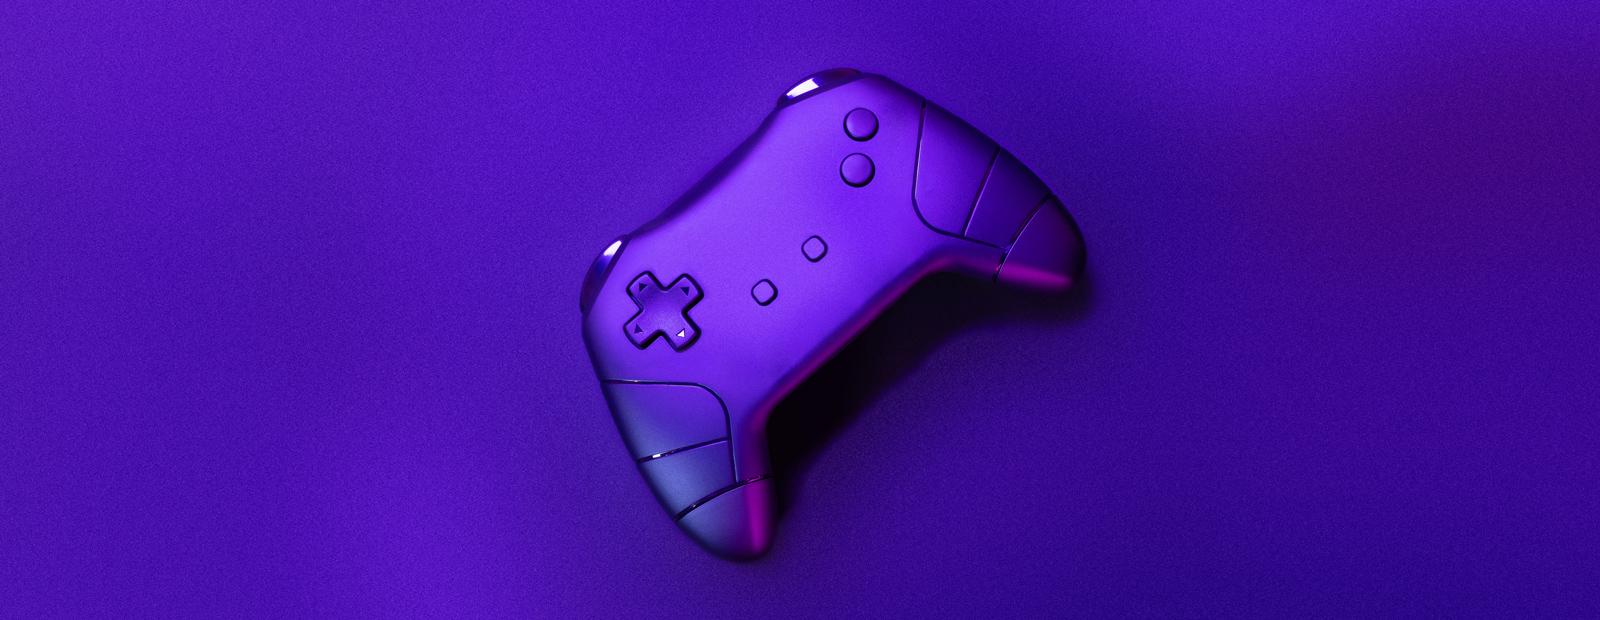 A purple controller sits on a purple surface.